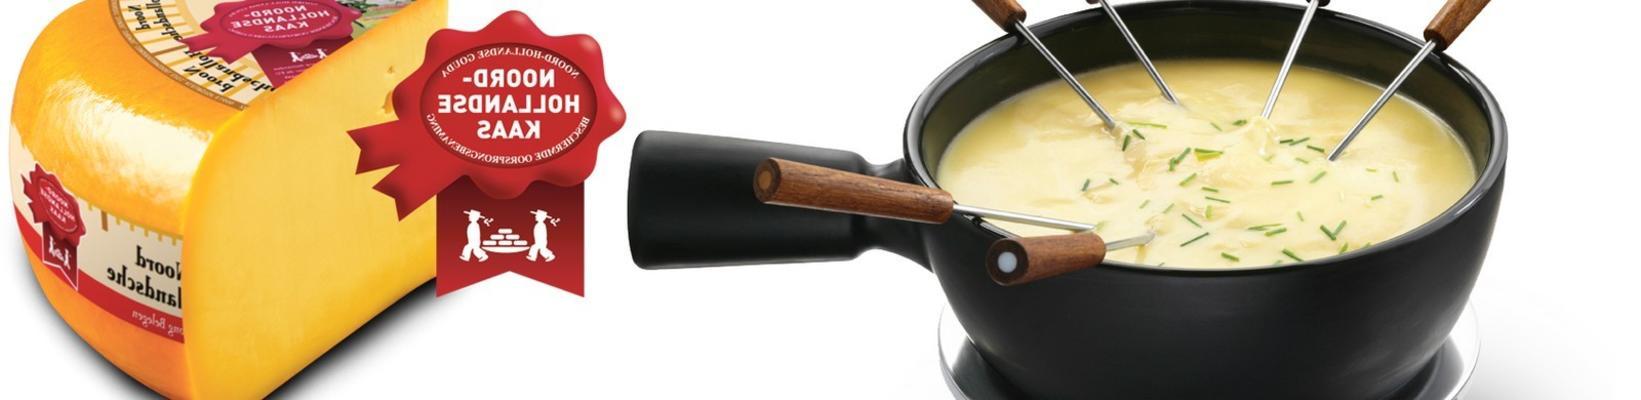 cheese fondue with North Holland cheese